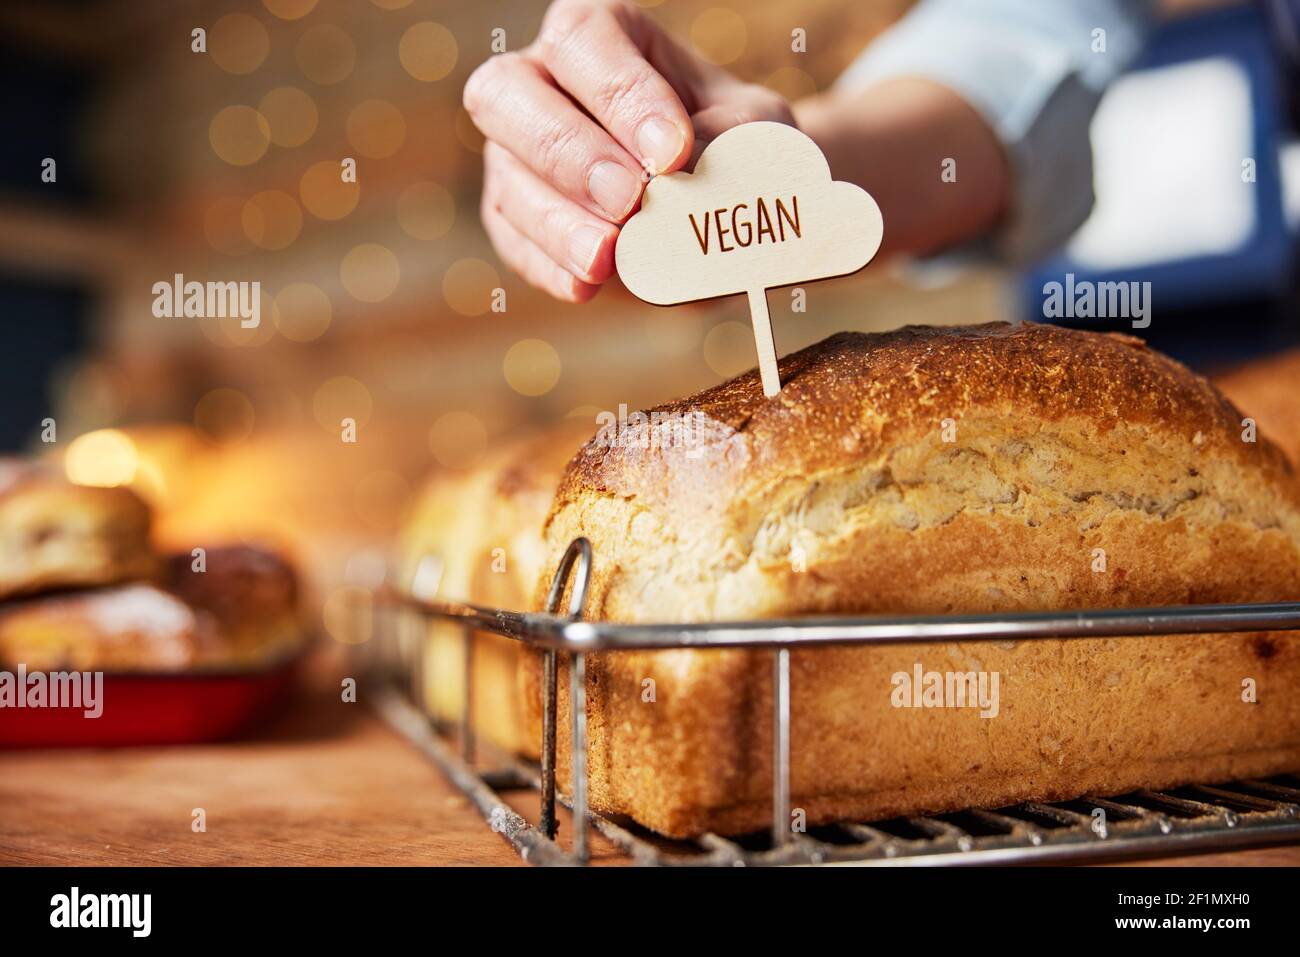 Sales Assistant In Bakery Putting Vegan Label Into Freshly Baked Baked Sourdough Loaves Of Bread Stock Photo